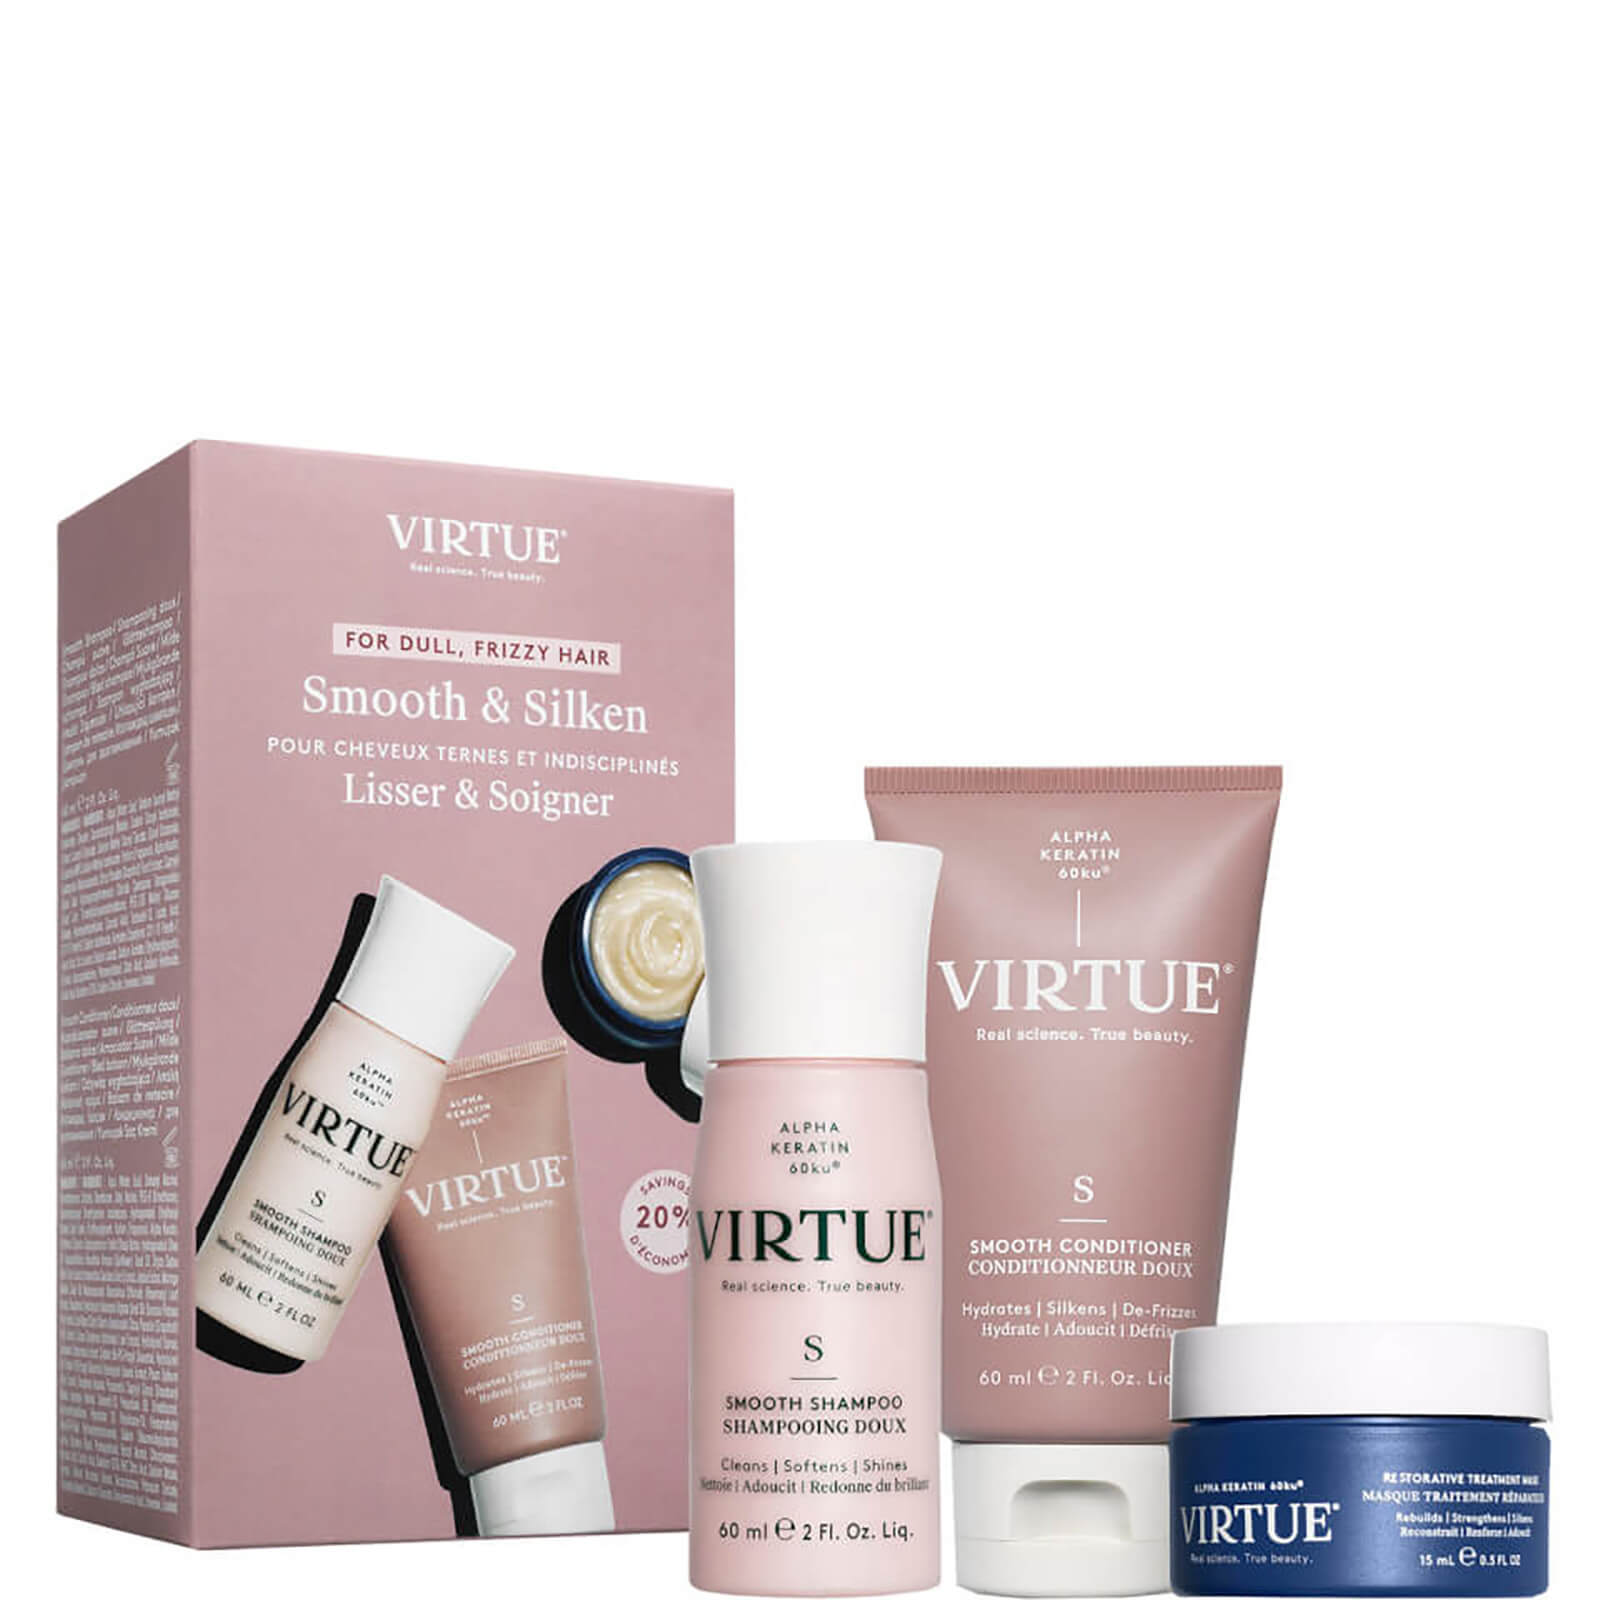 VIRTUE Smooth Discovery Kit 3 x 60ml